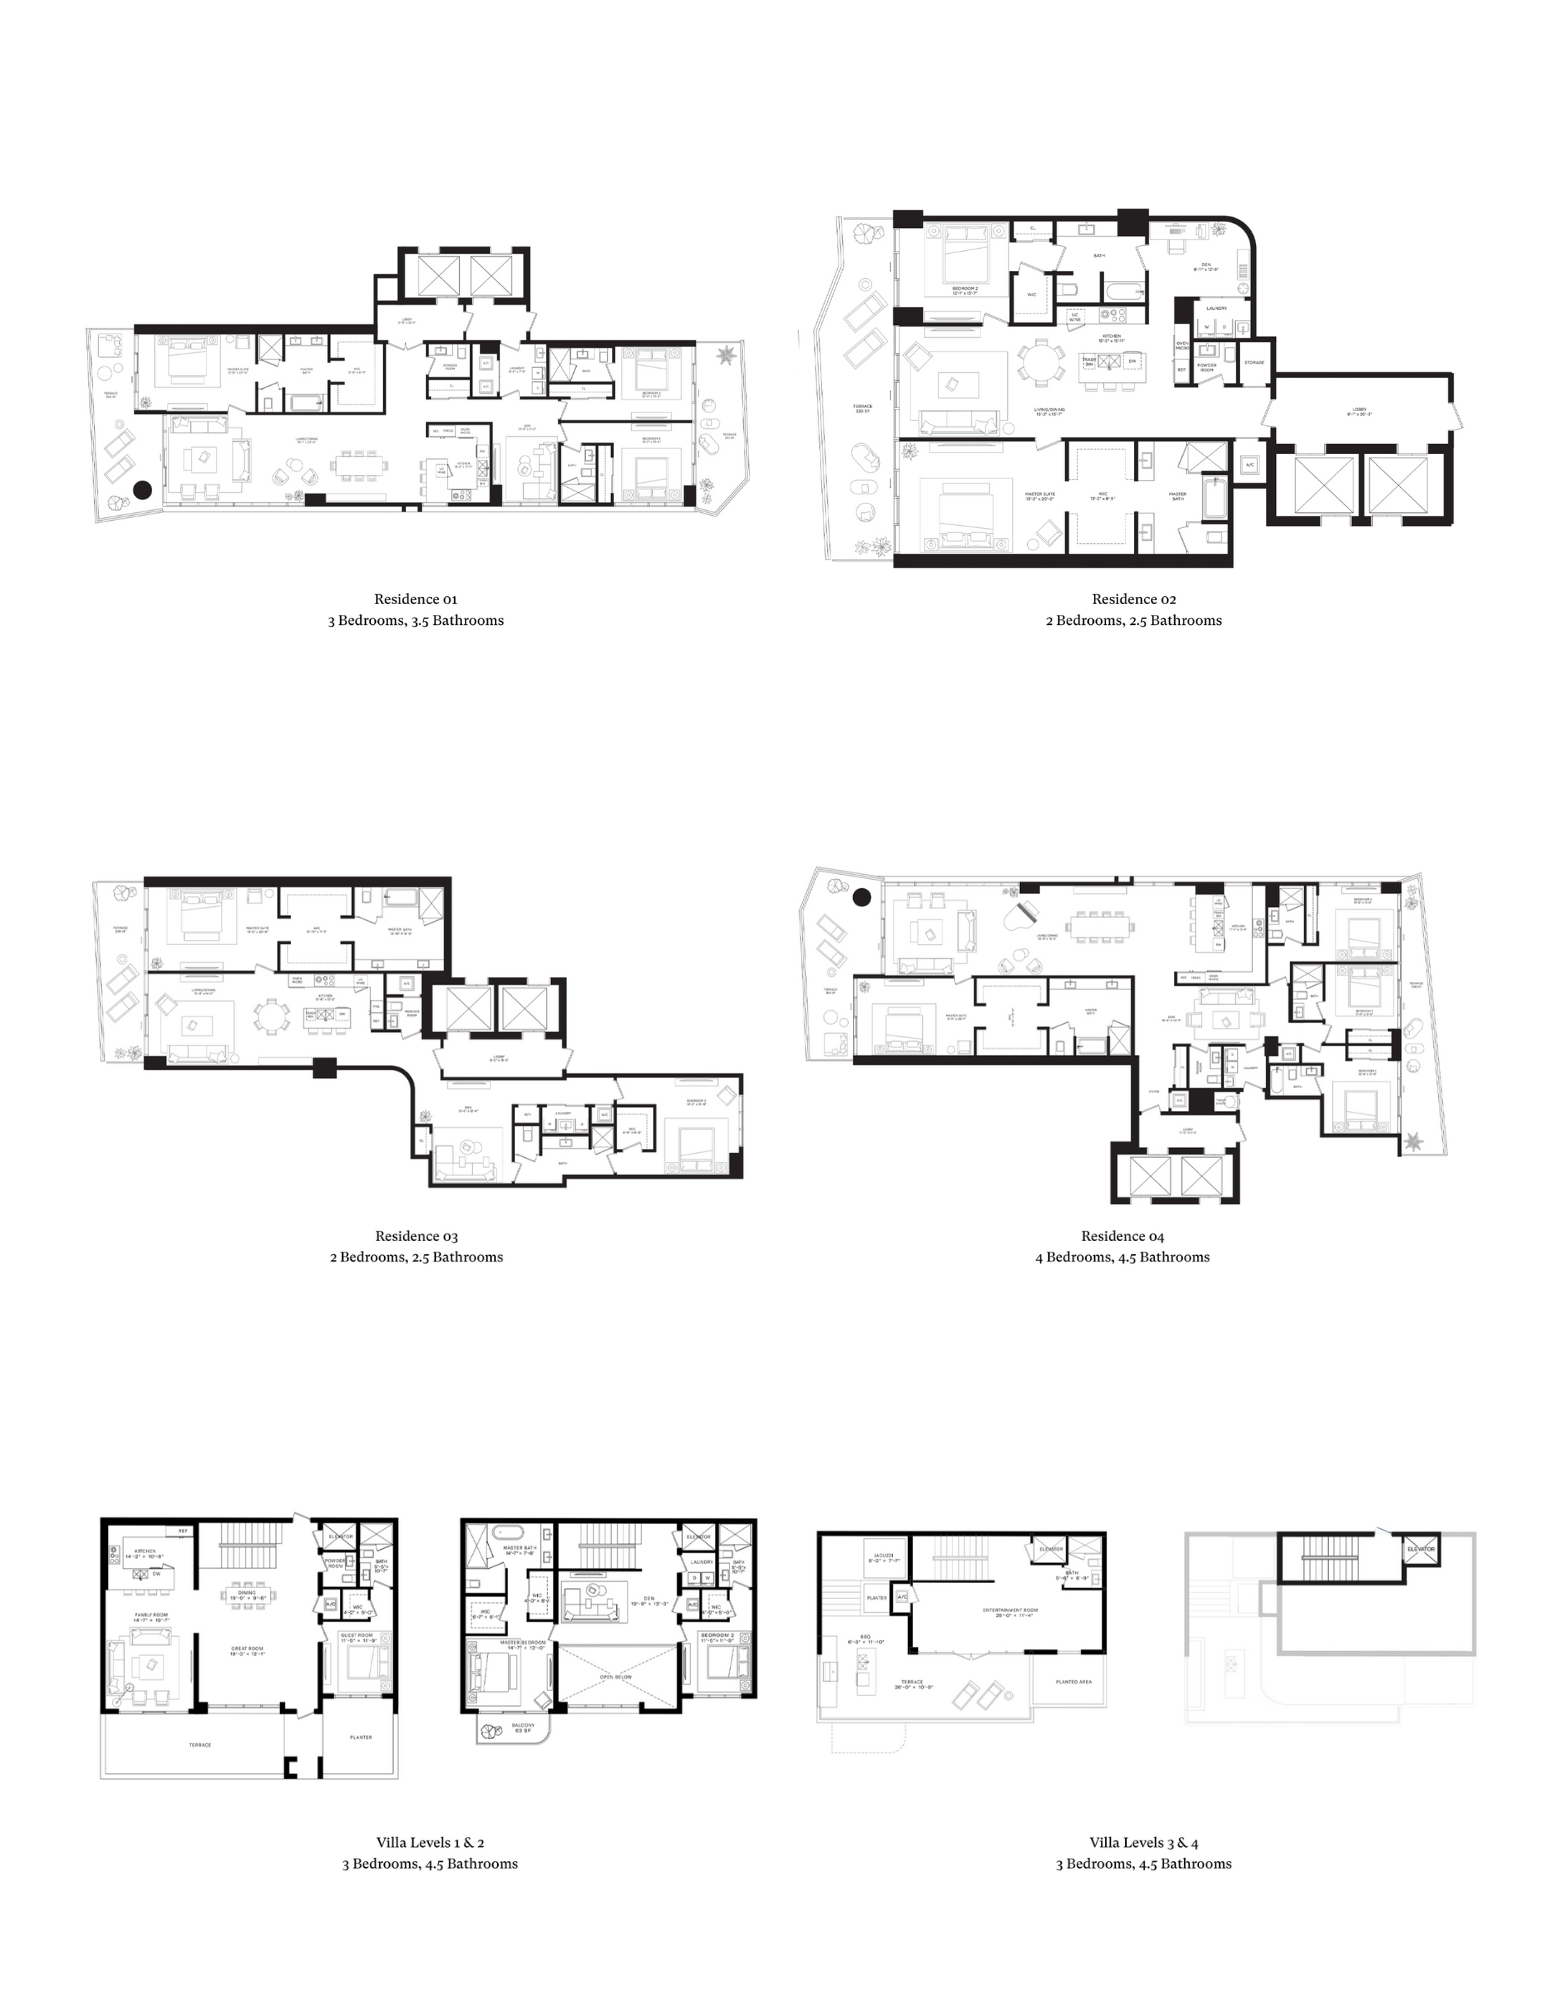 Tampa Ritz Carlton Condos For Sale Floorplans shown in black and white.